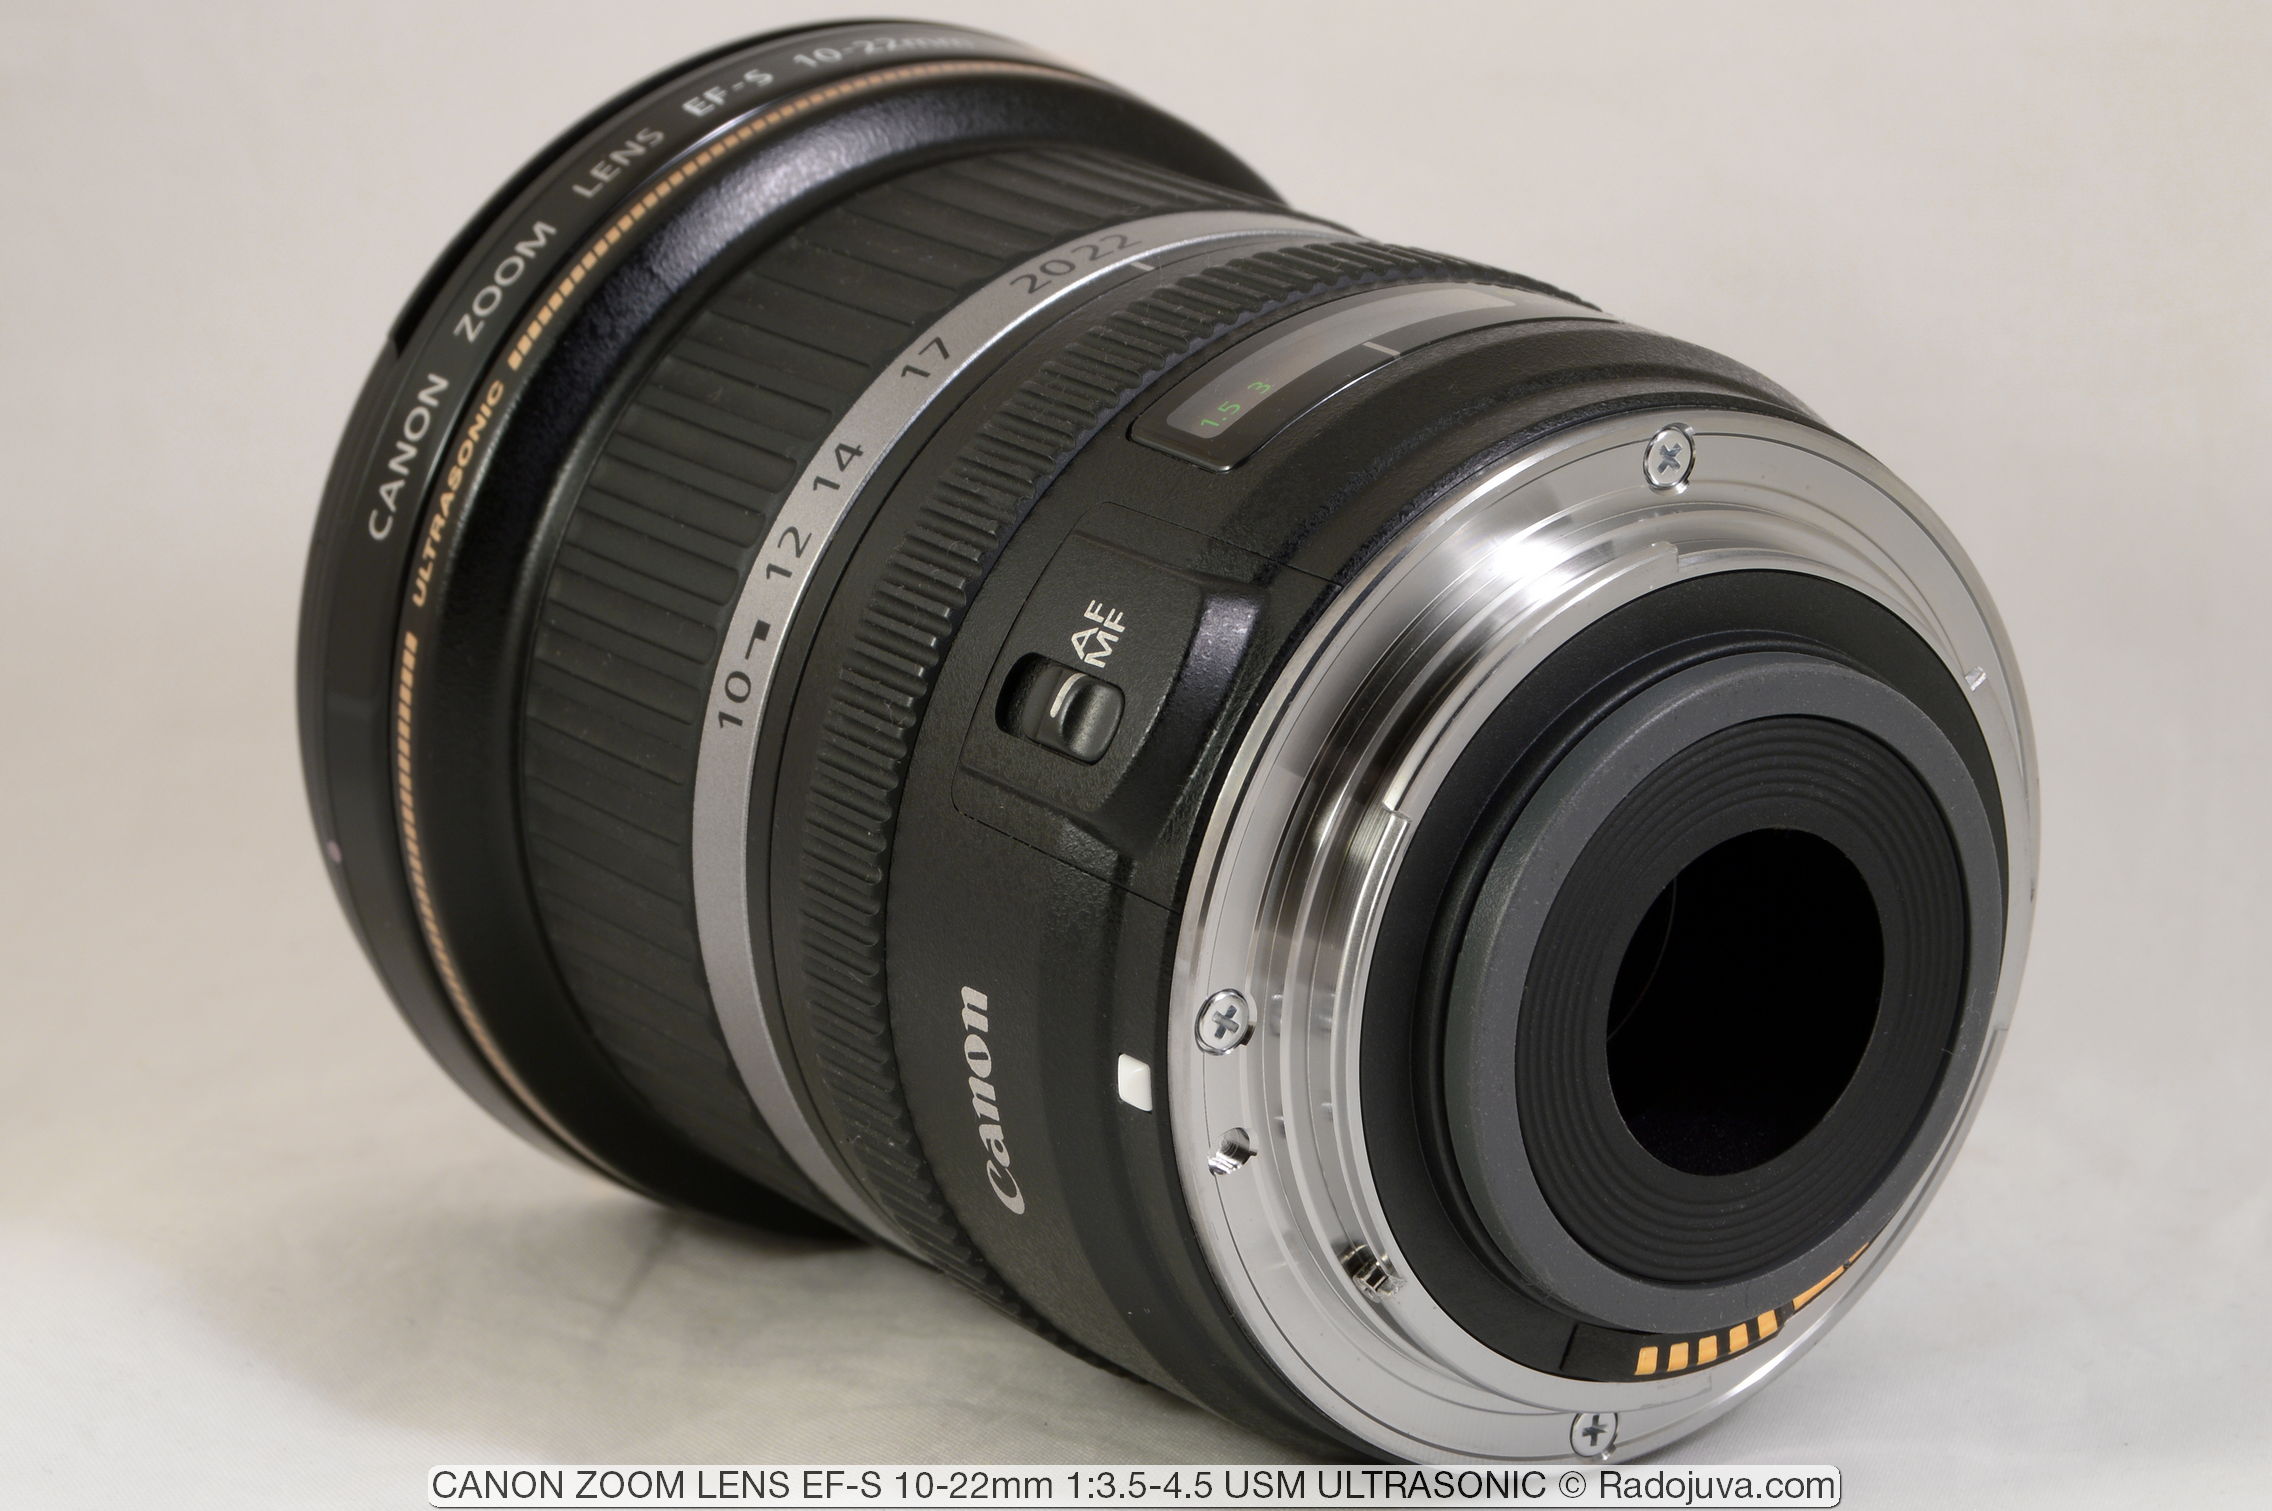 Canon Zoom Lens EF-S 10-22mm 1: 3.5-4.5 USM ULTRASONIC Review | Happy